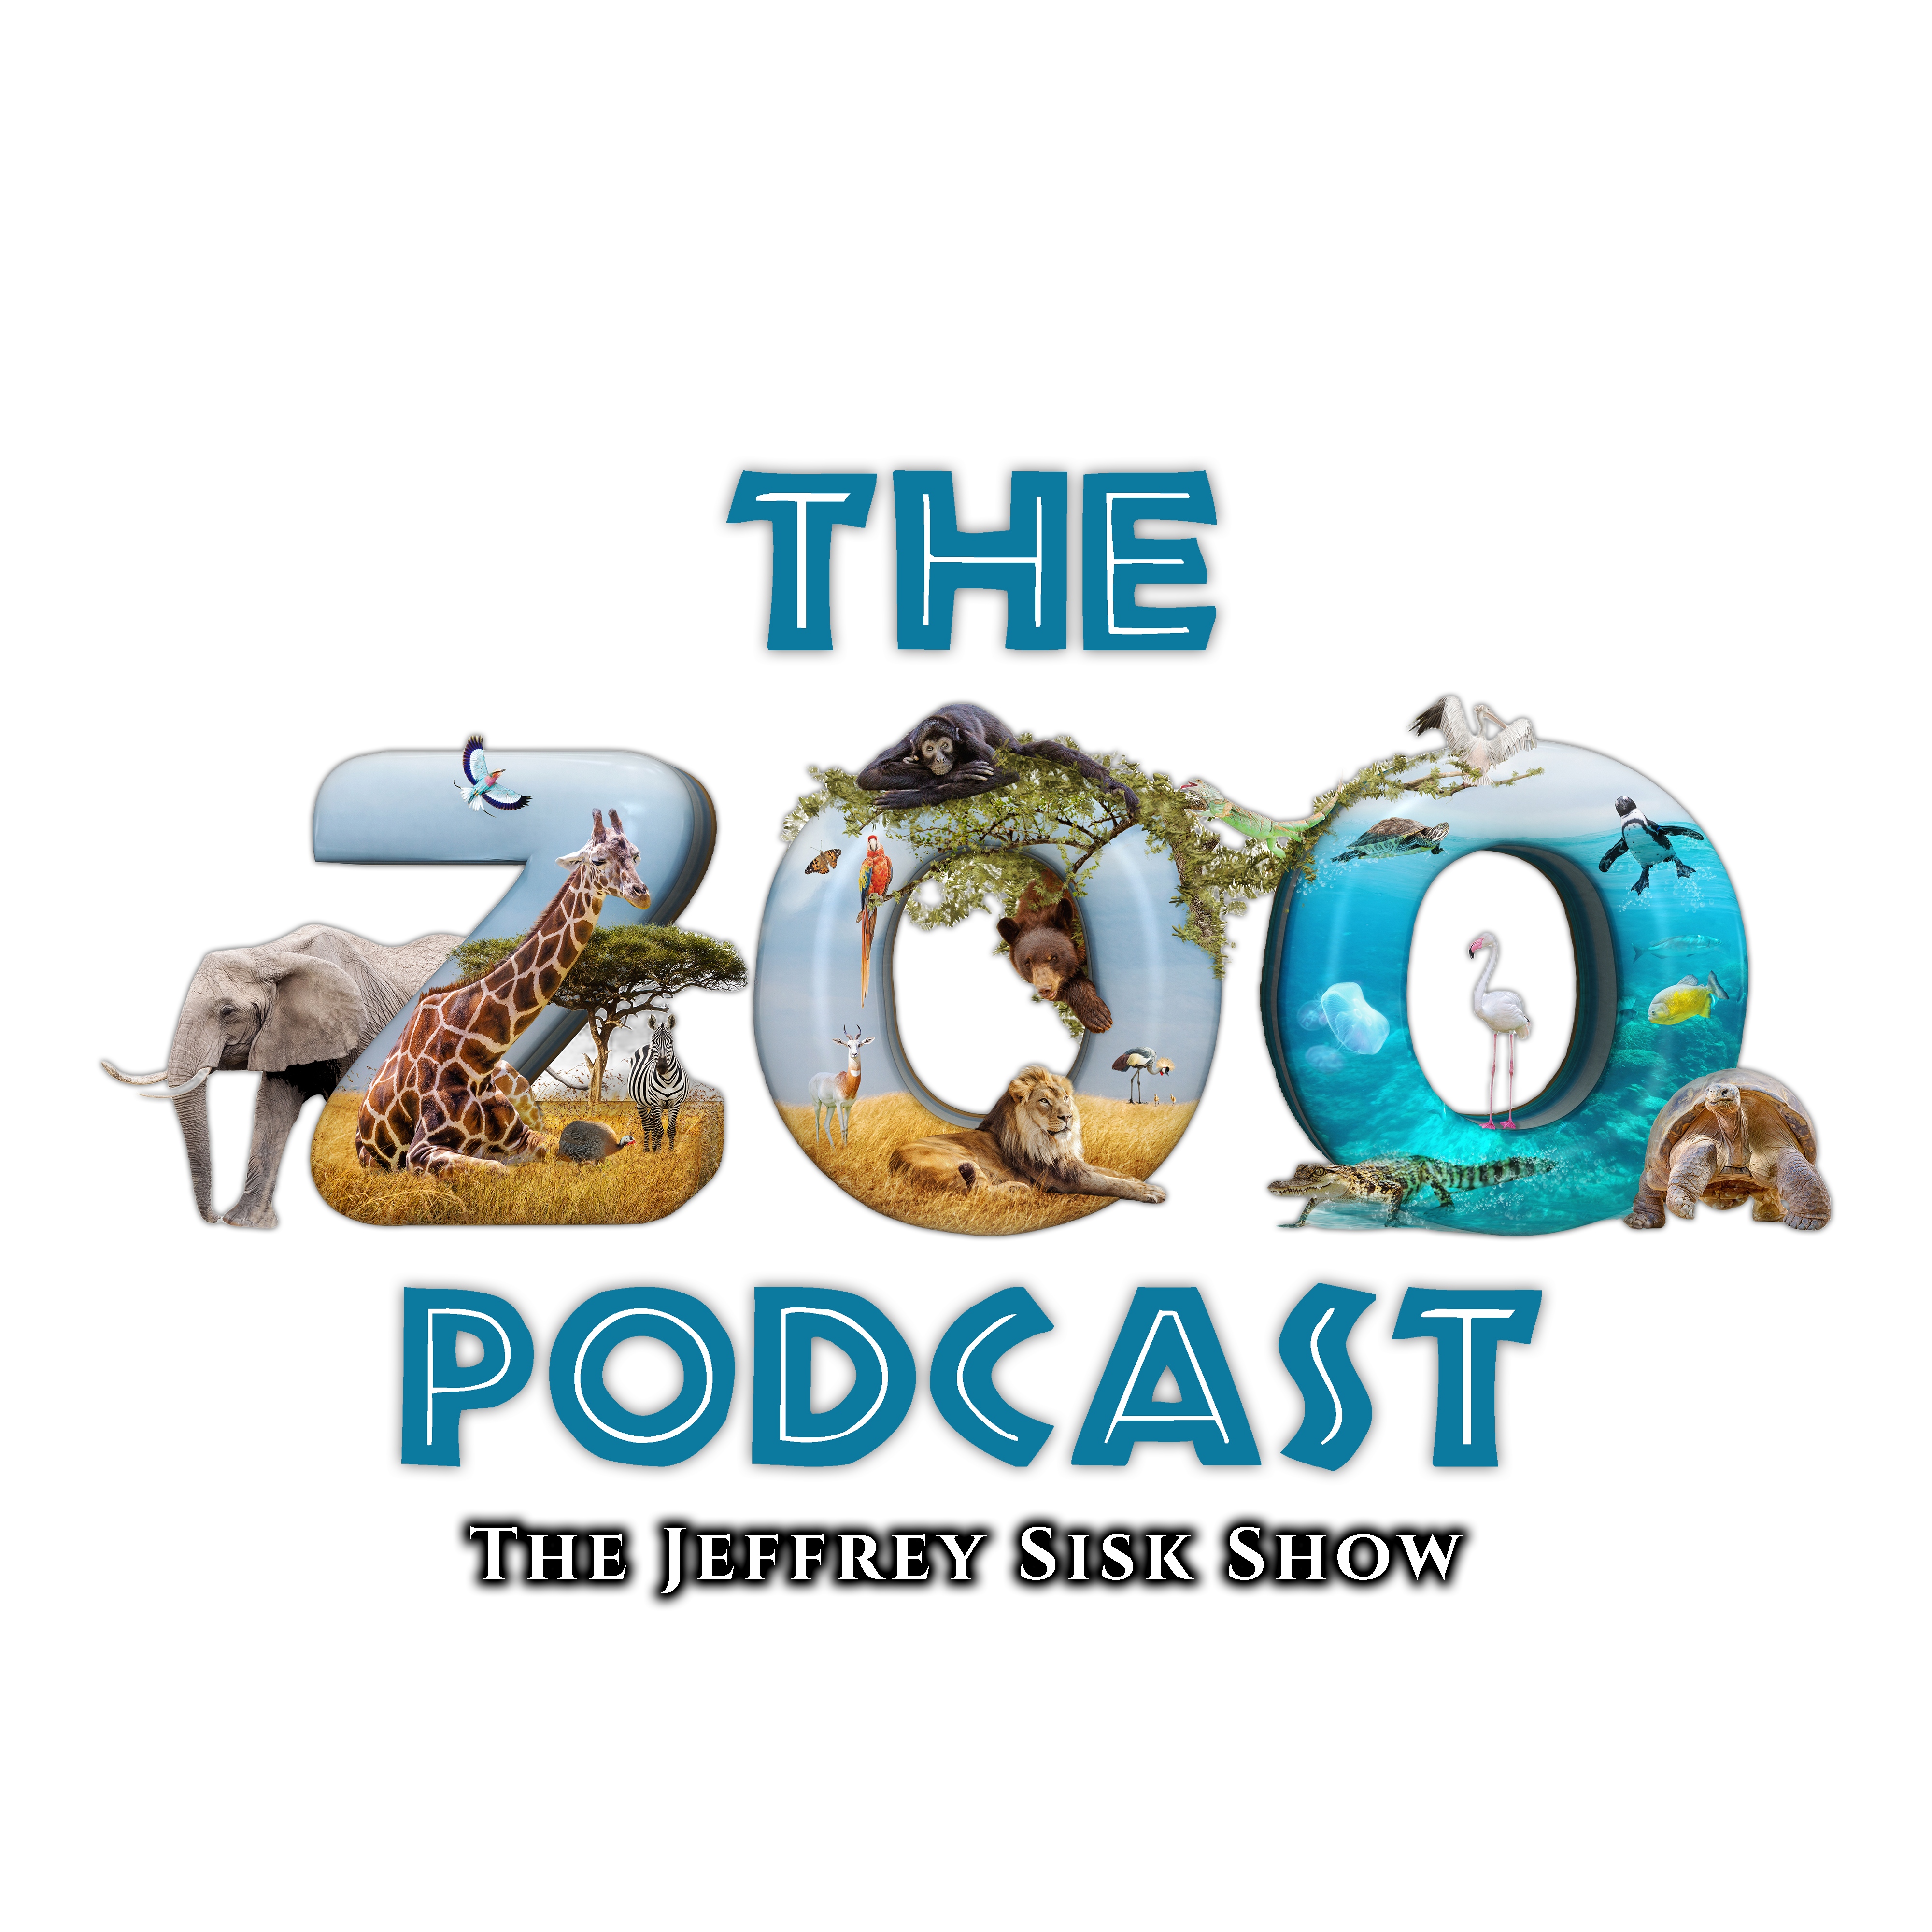 The Zoo Podcast - The Jeffrey Sisk Show